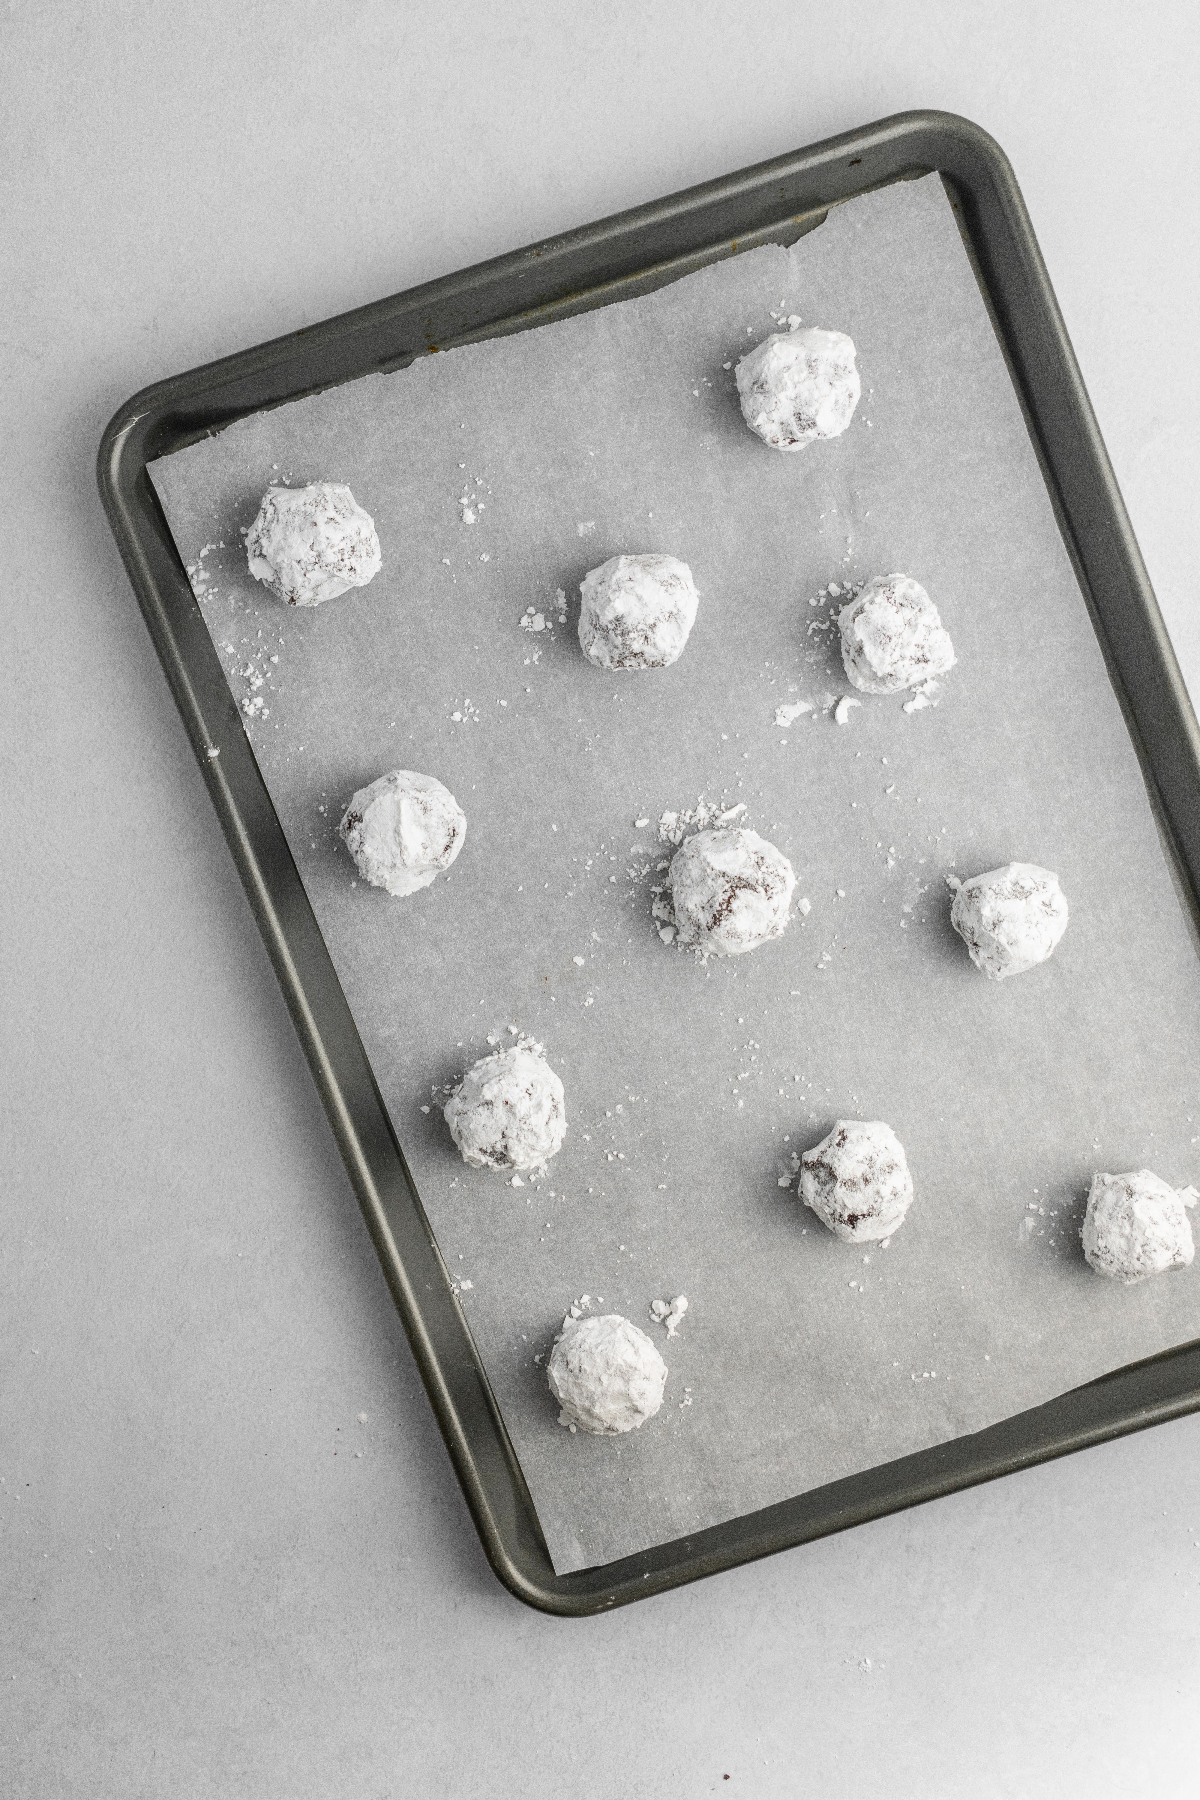 Powdered sugar coated cookie dough balls on a parchment lined cookie sheet.